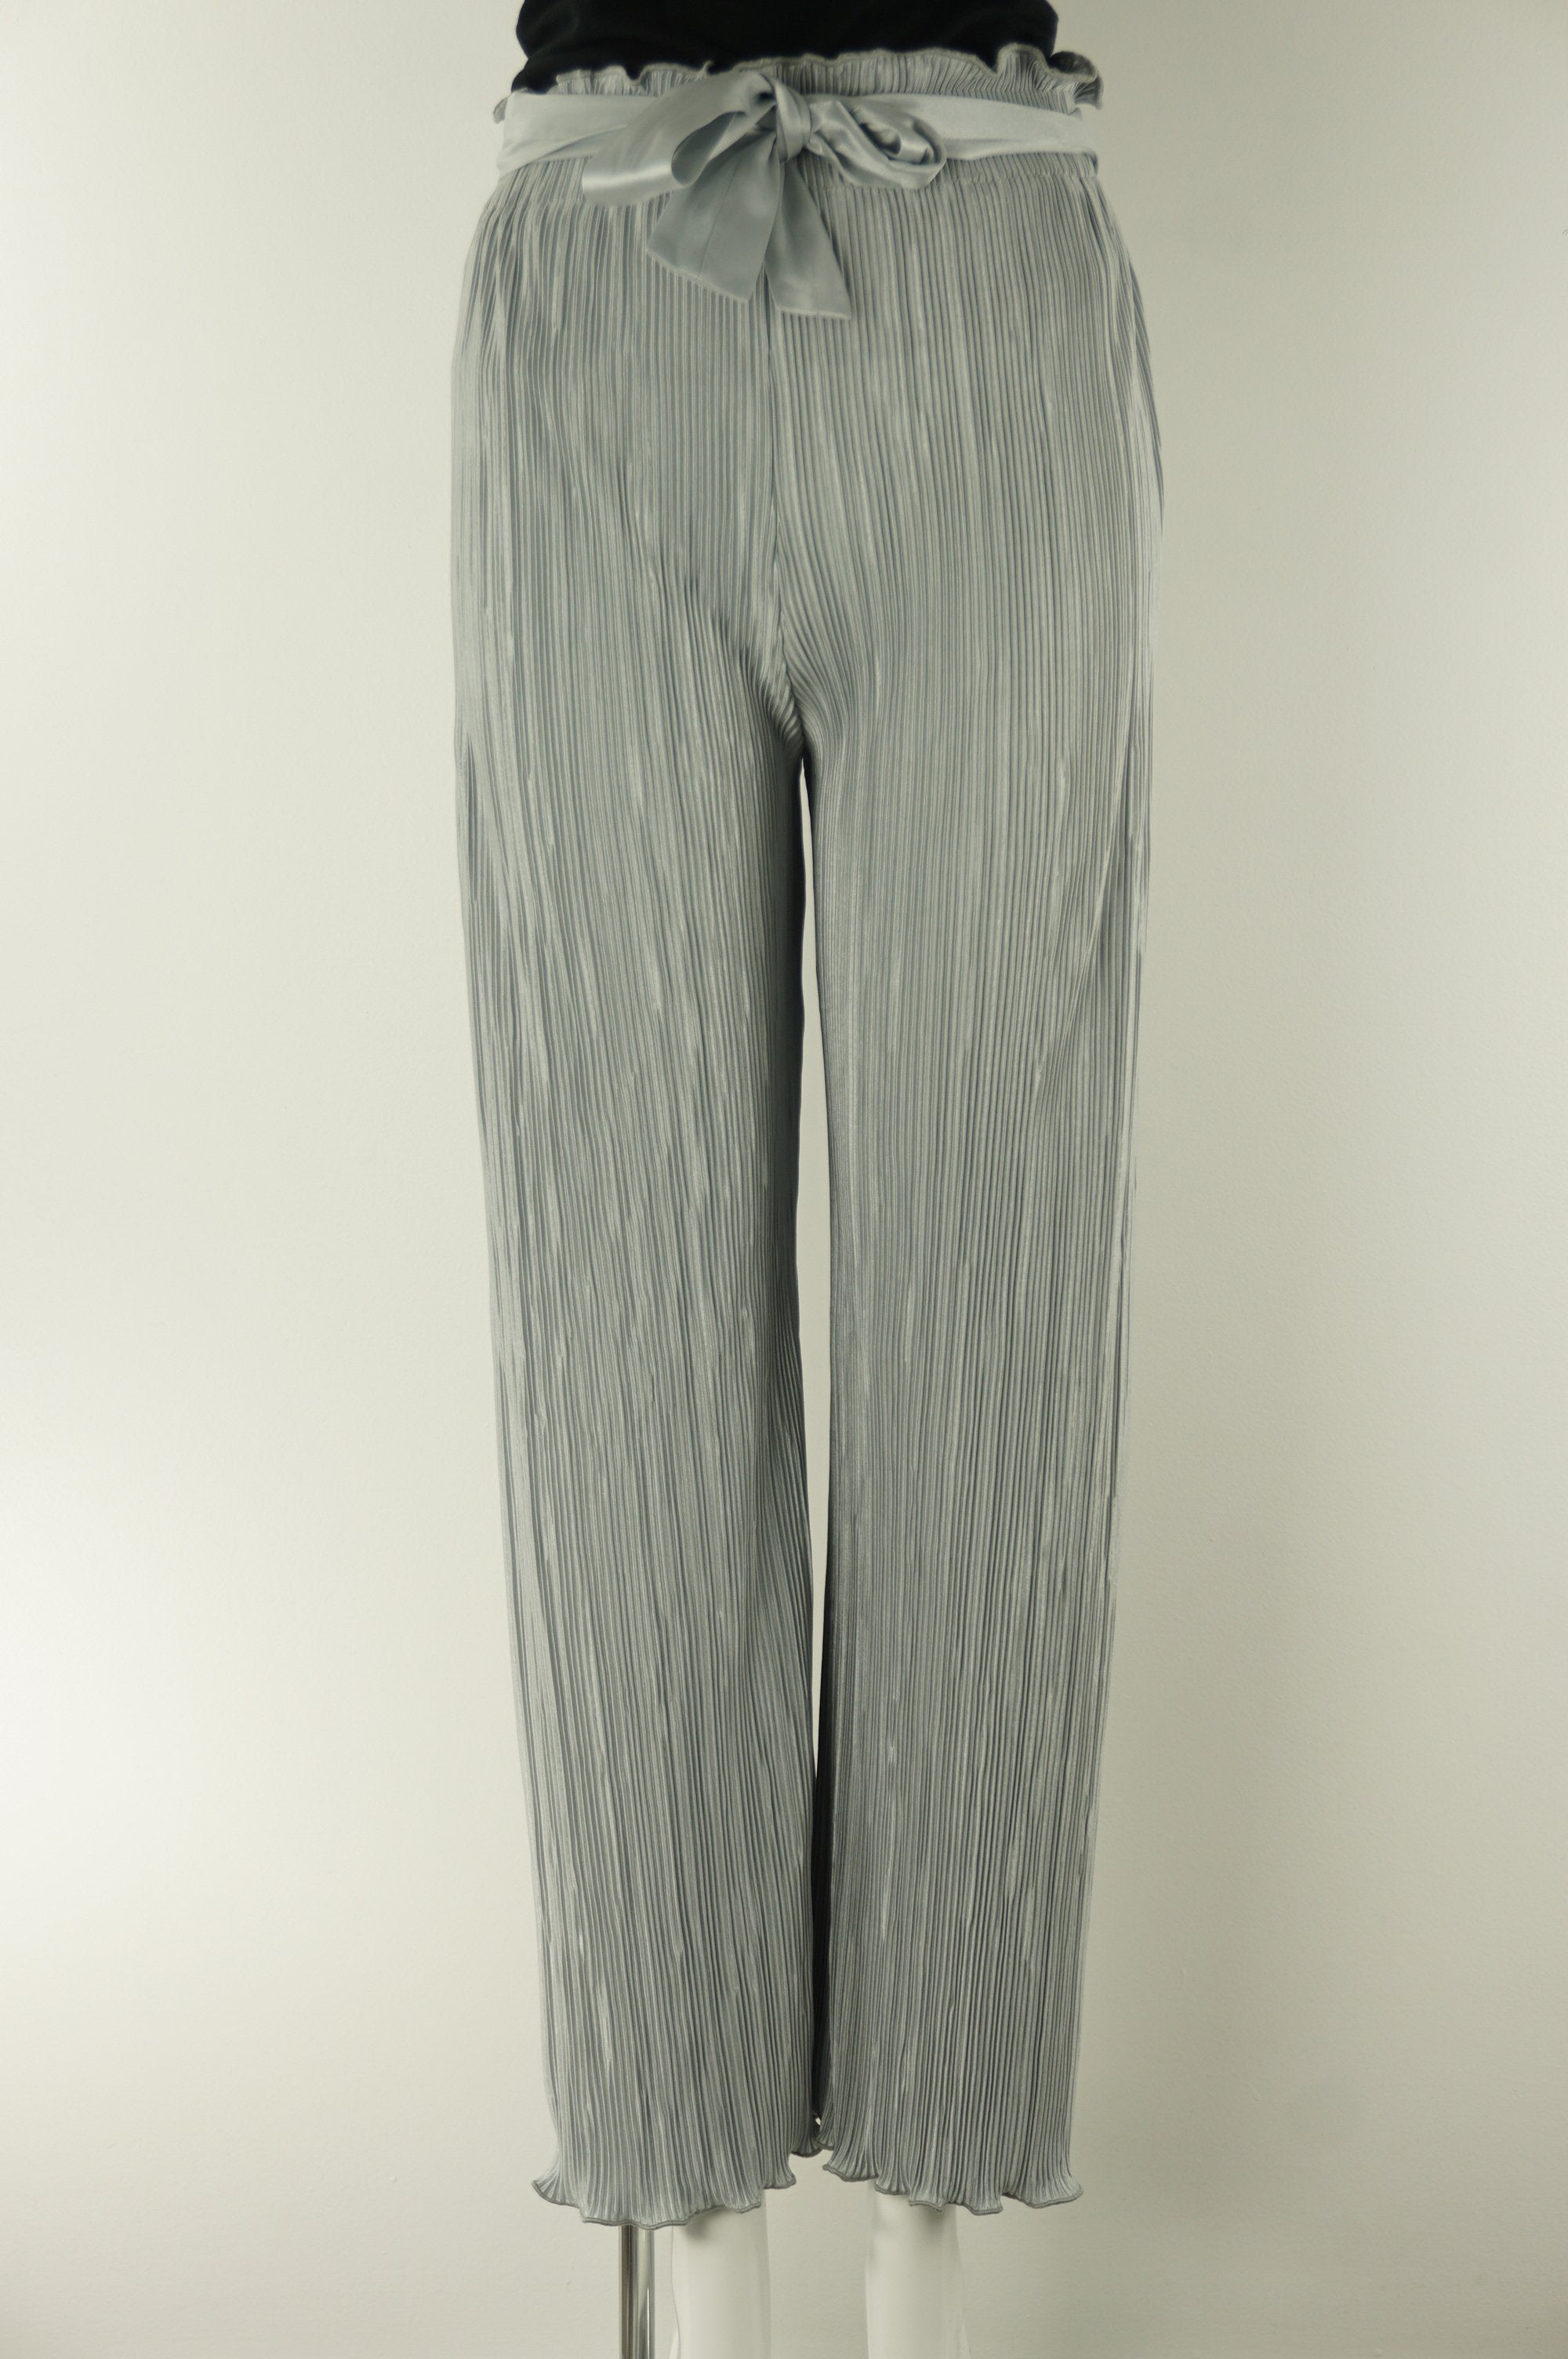 Couturist Pleated Wide Leg Pants with Curl Edge, Probably different from other pants in your closet, this super stretchy pleated pants lets you move around comfortably in style! Elastic waistband with adjustable waist strap., Blue, Grey, Sythetic Stretchy Fabric, women's Pants, women's Blue, Grey Pants, Couturist women's Pants, women's pleated stretchy pants, women's soft silky palazzo pants